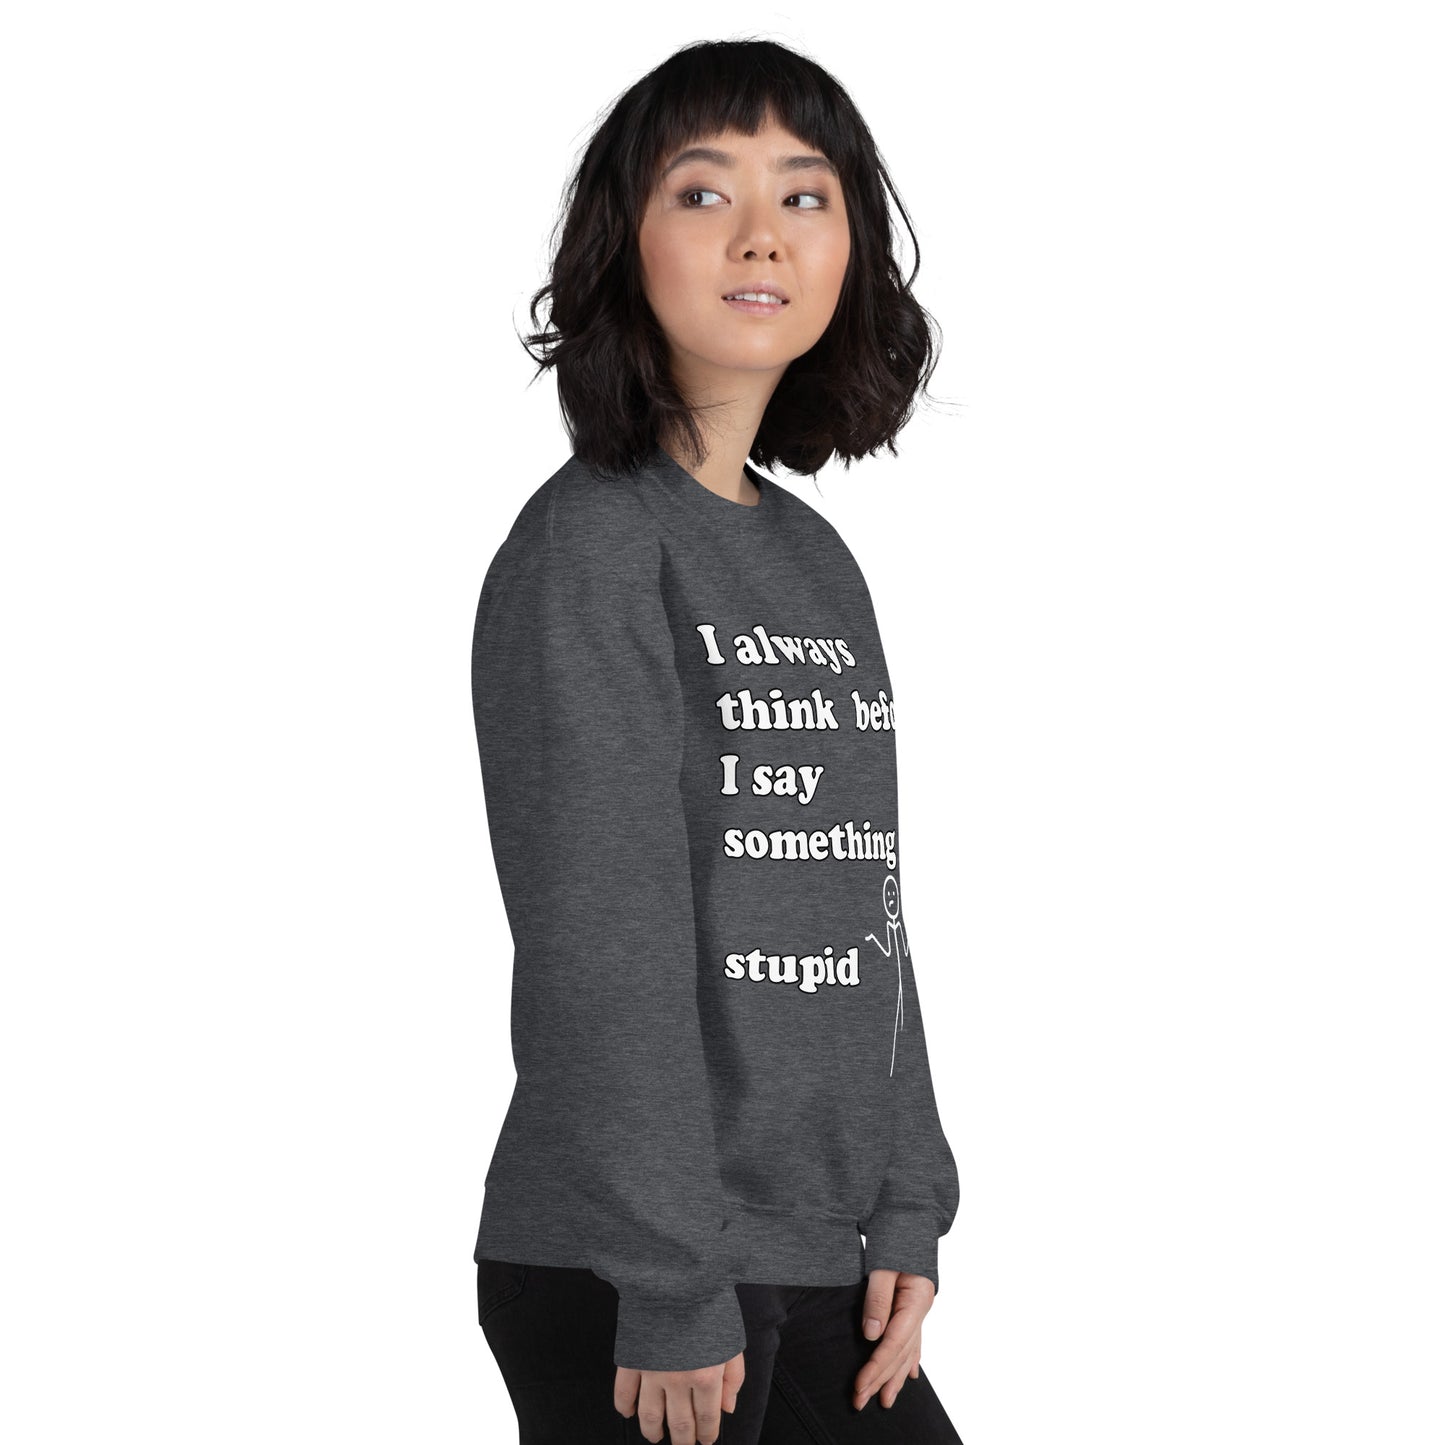 Woman with grey sweatshirt with text "I always think before I say something stupid"